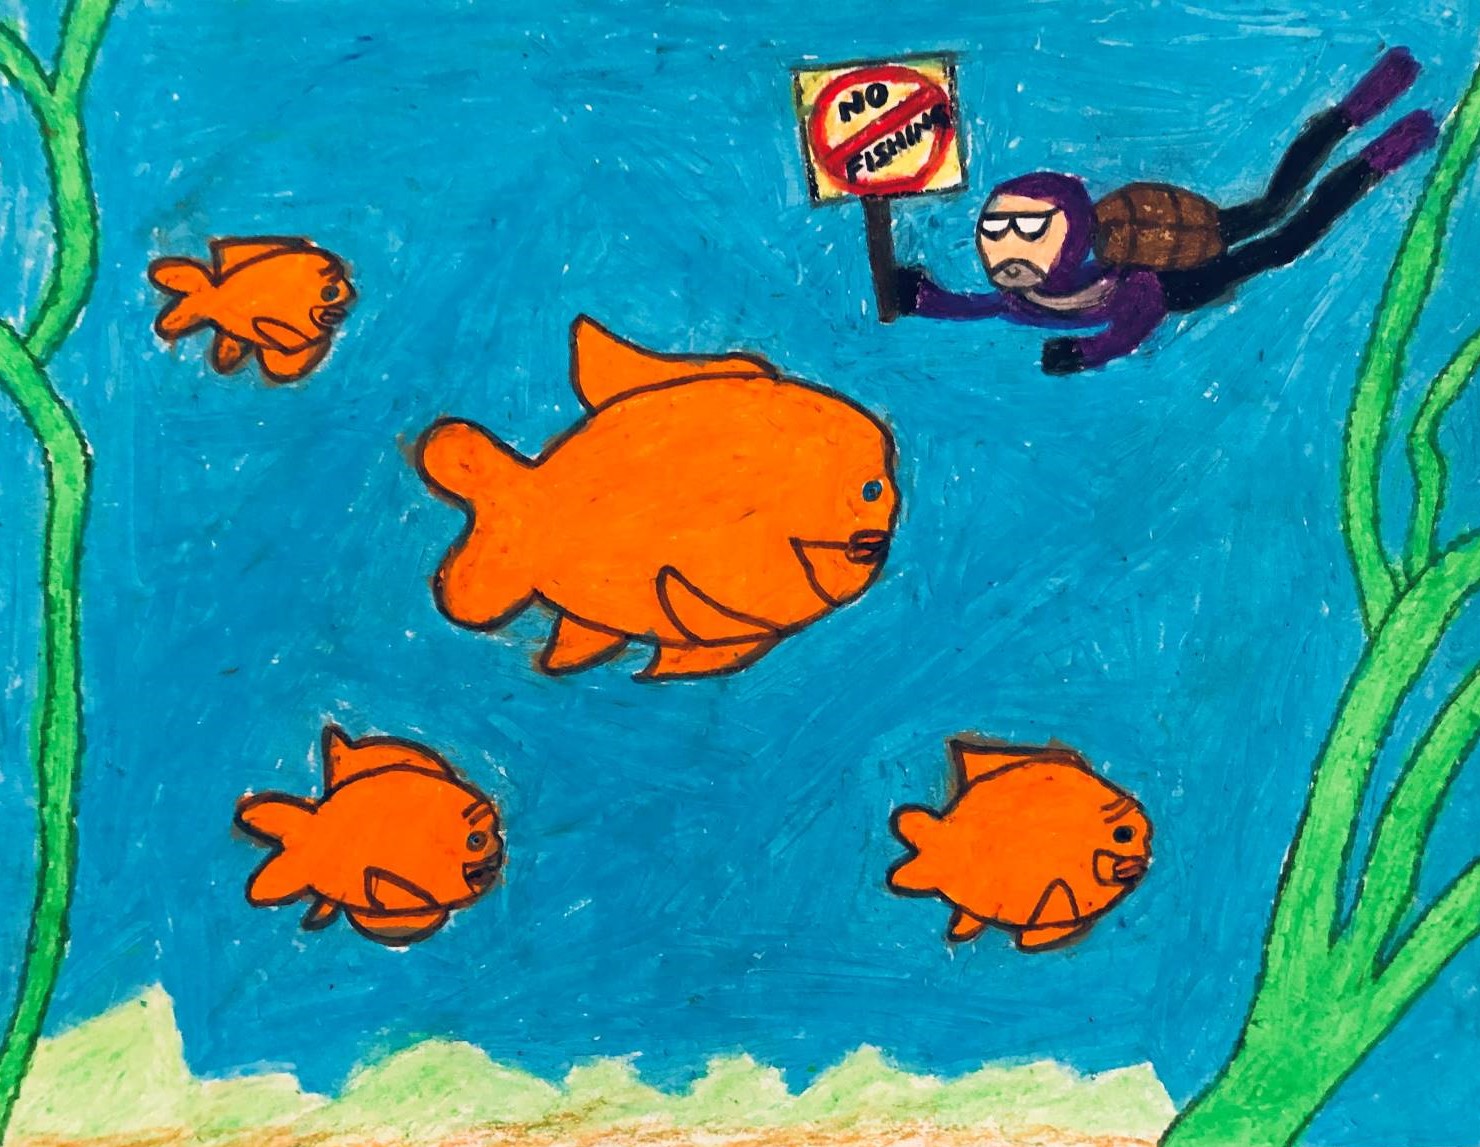 A SCUBA diver swims underwater holding a No Fishing sign while Garibaldi fish swim in foreground